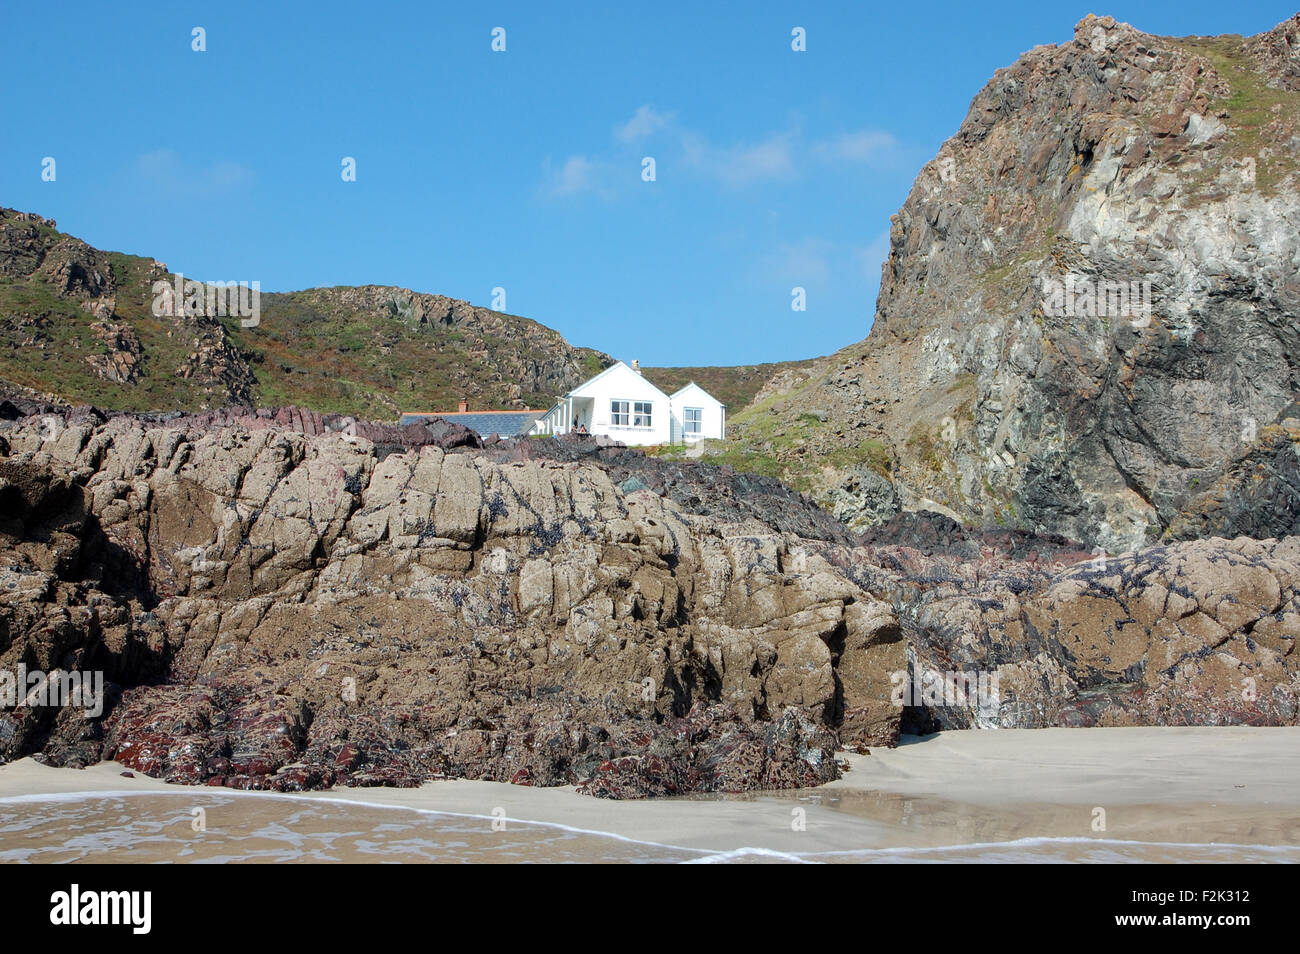 White Cornish Cottage On The Cliffs Above The Sea At Kynance Cove